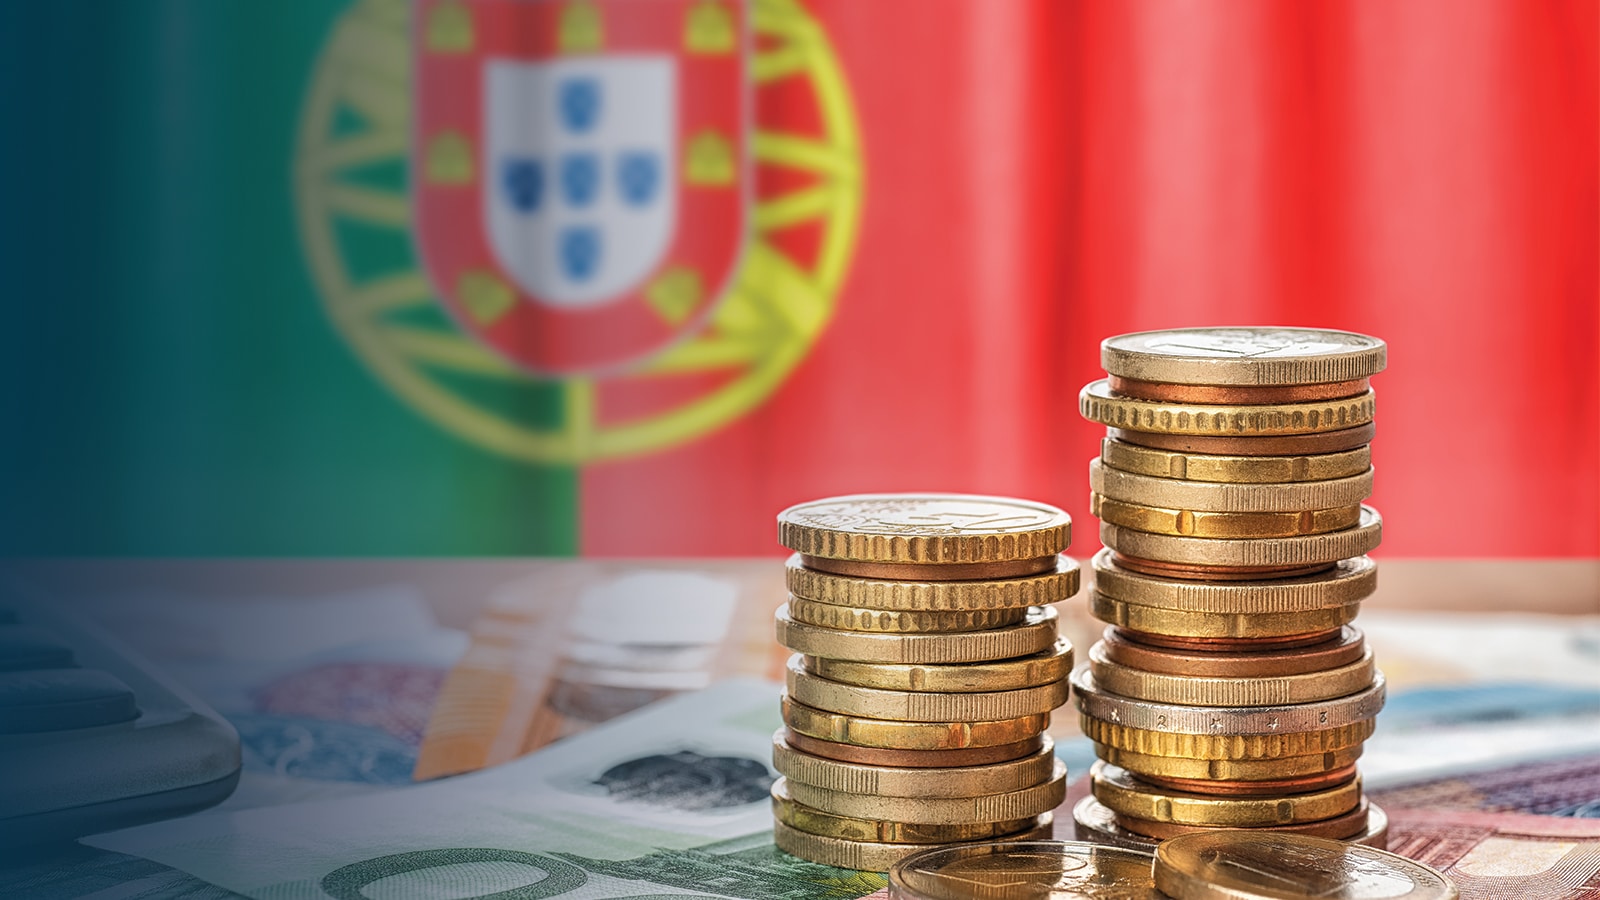 Coins and banknotes on a table with the Portuguese flag in the background